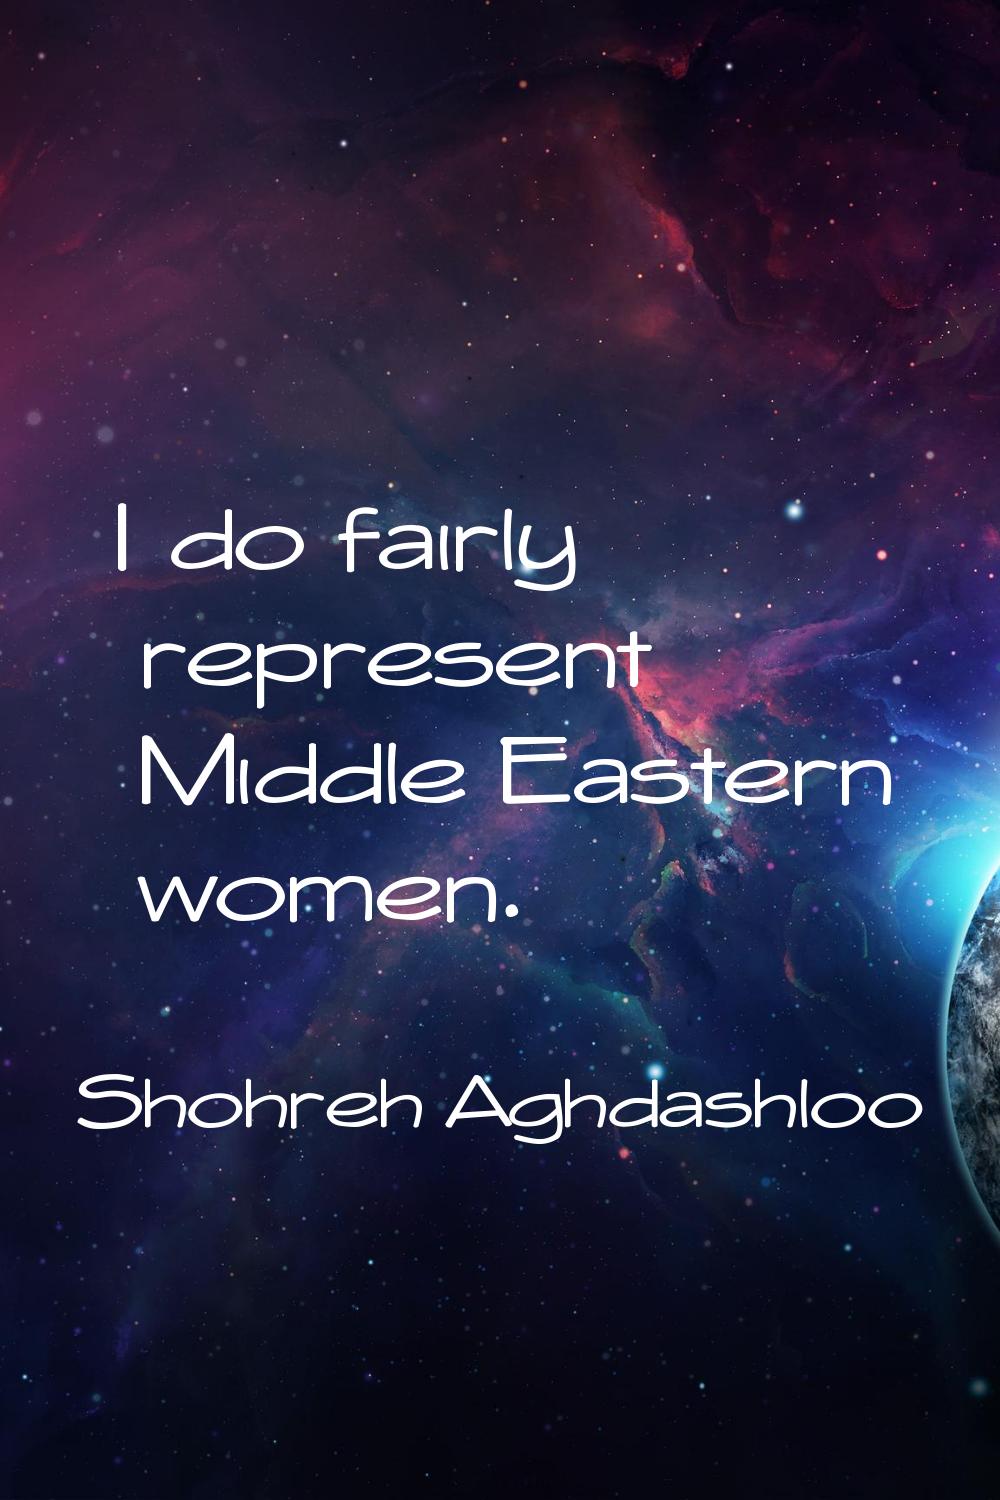 I do fairly represent Middle Eastern women.